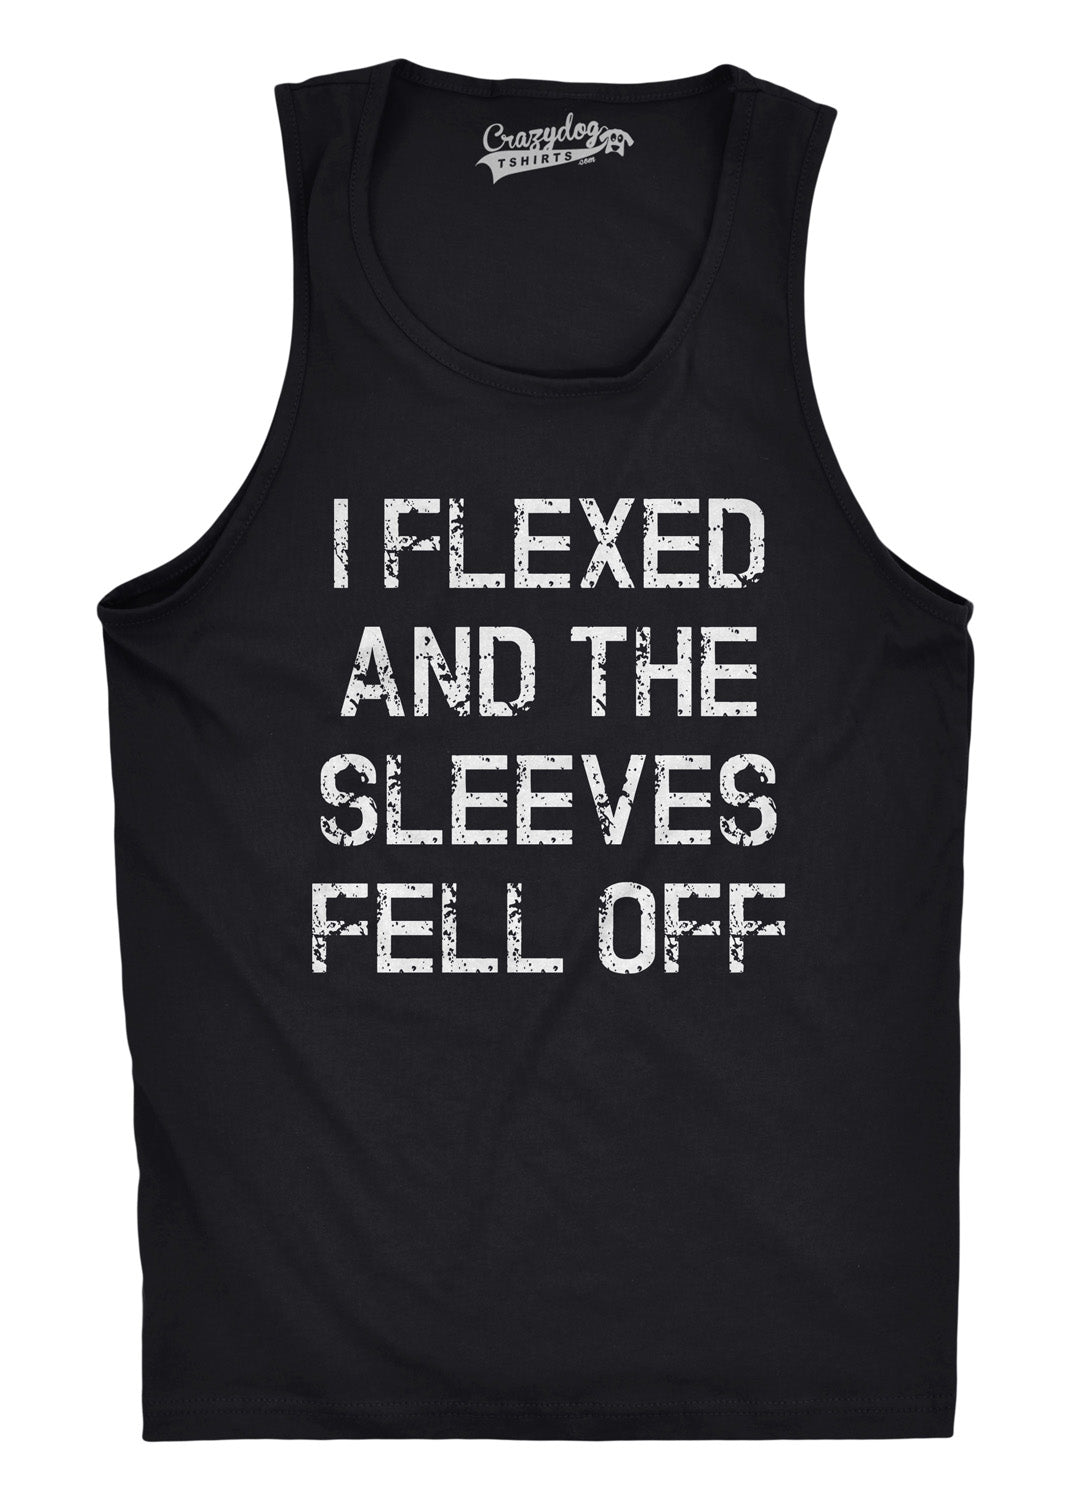 Funny Black I Flexed And The Sleeves Fell Off Mens Tank Top Nerdy Fitness Tee